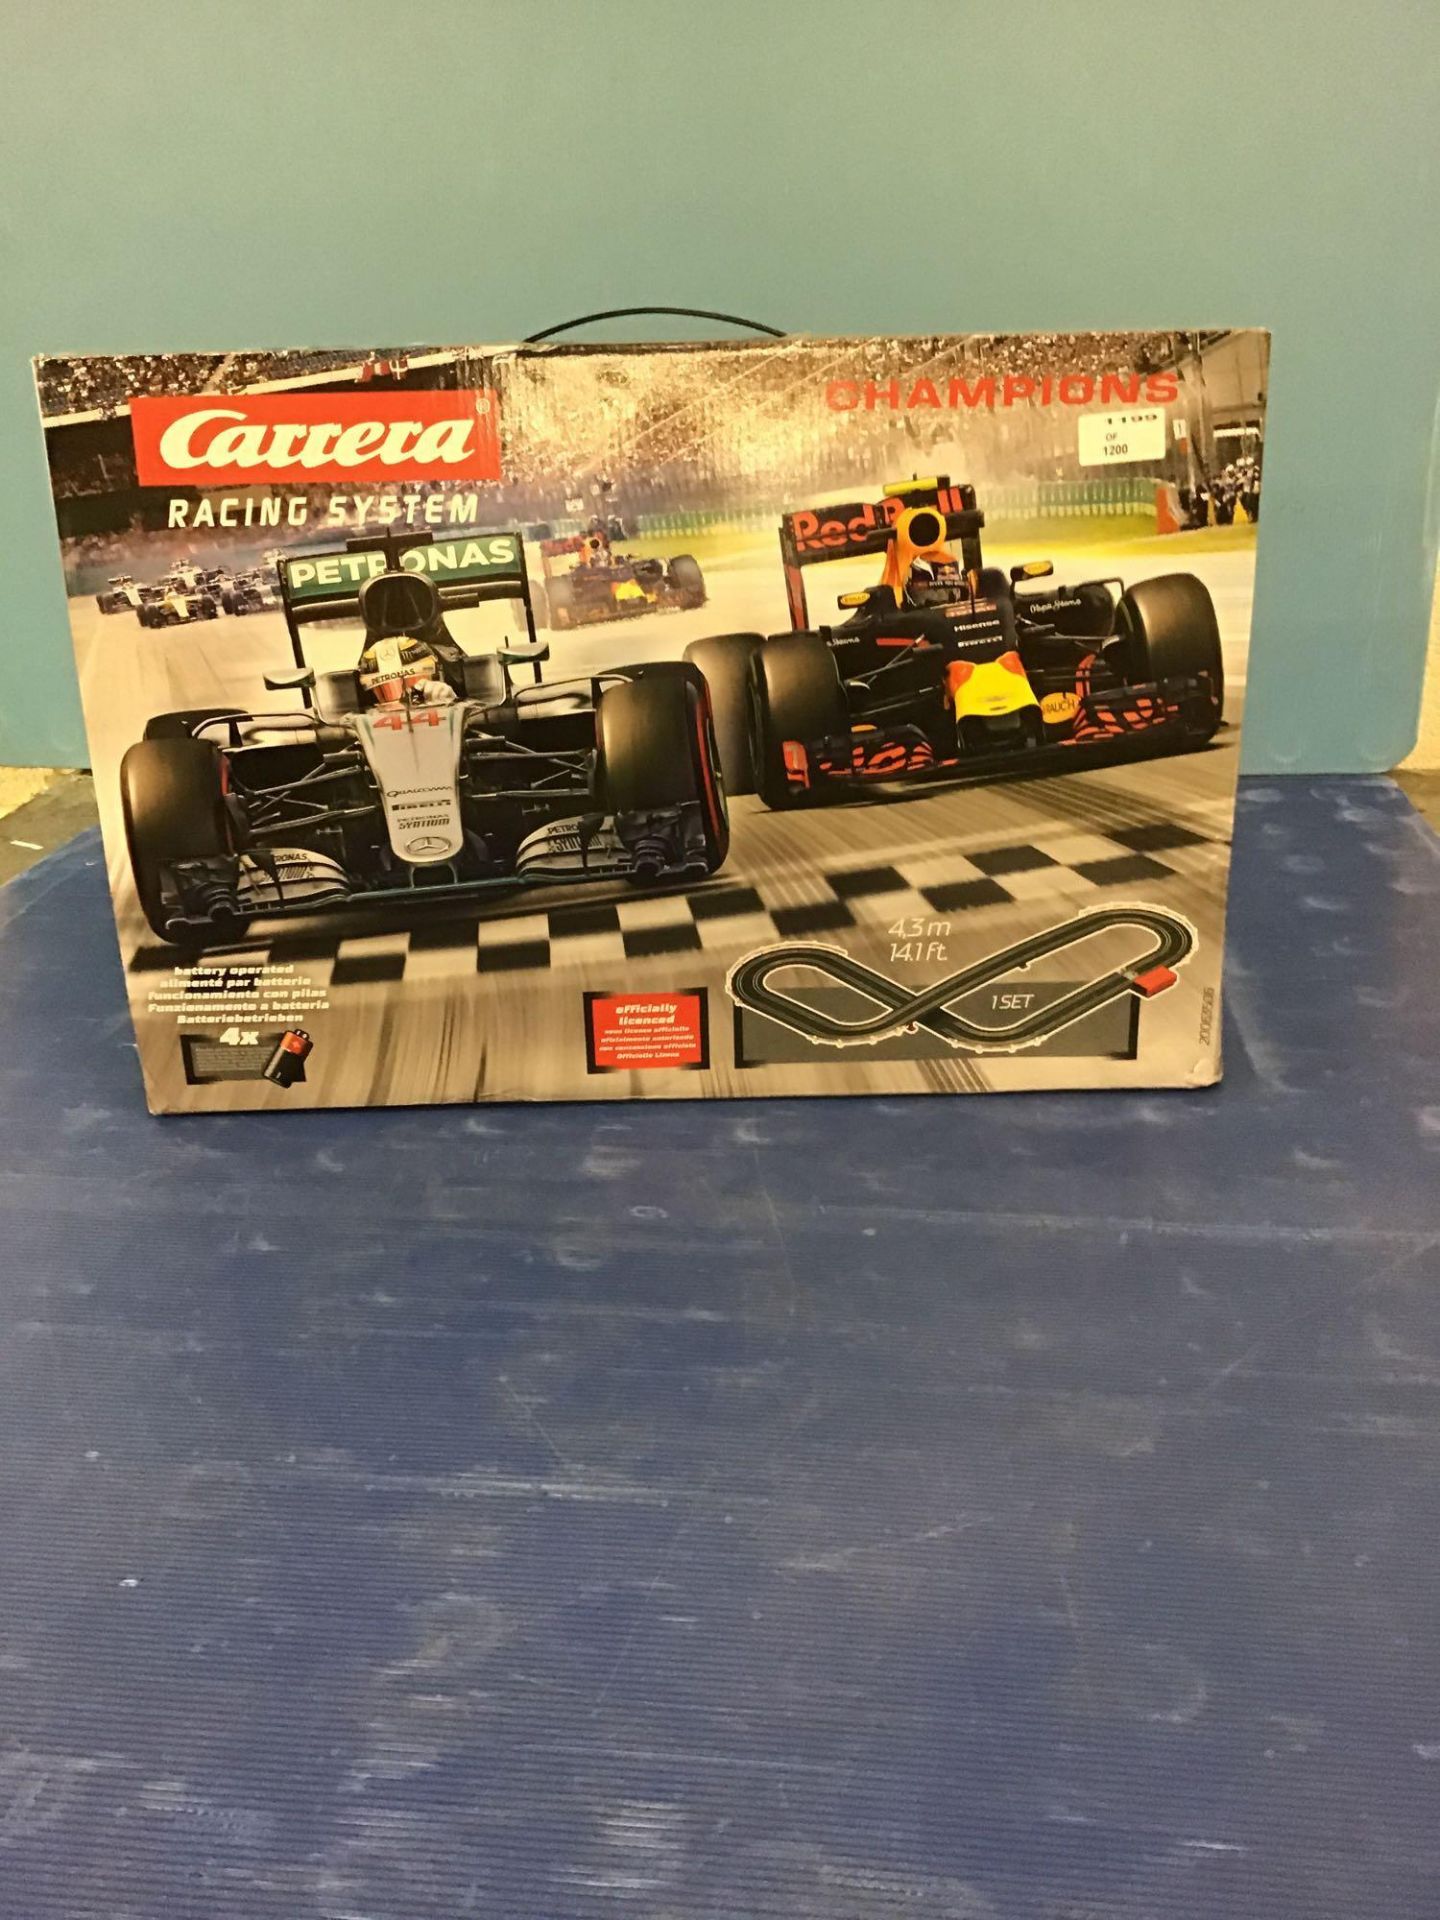 Carrera Mercedes F1 Rally Racing Toy Kids Play Set A Course Race Fun New £41.99 RRP - Image 2 of 5